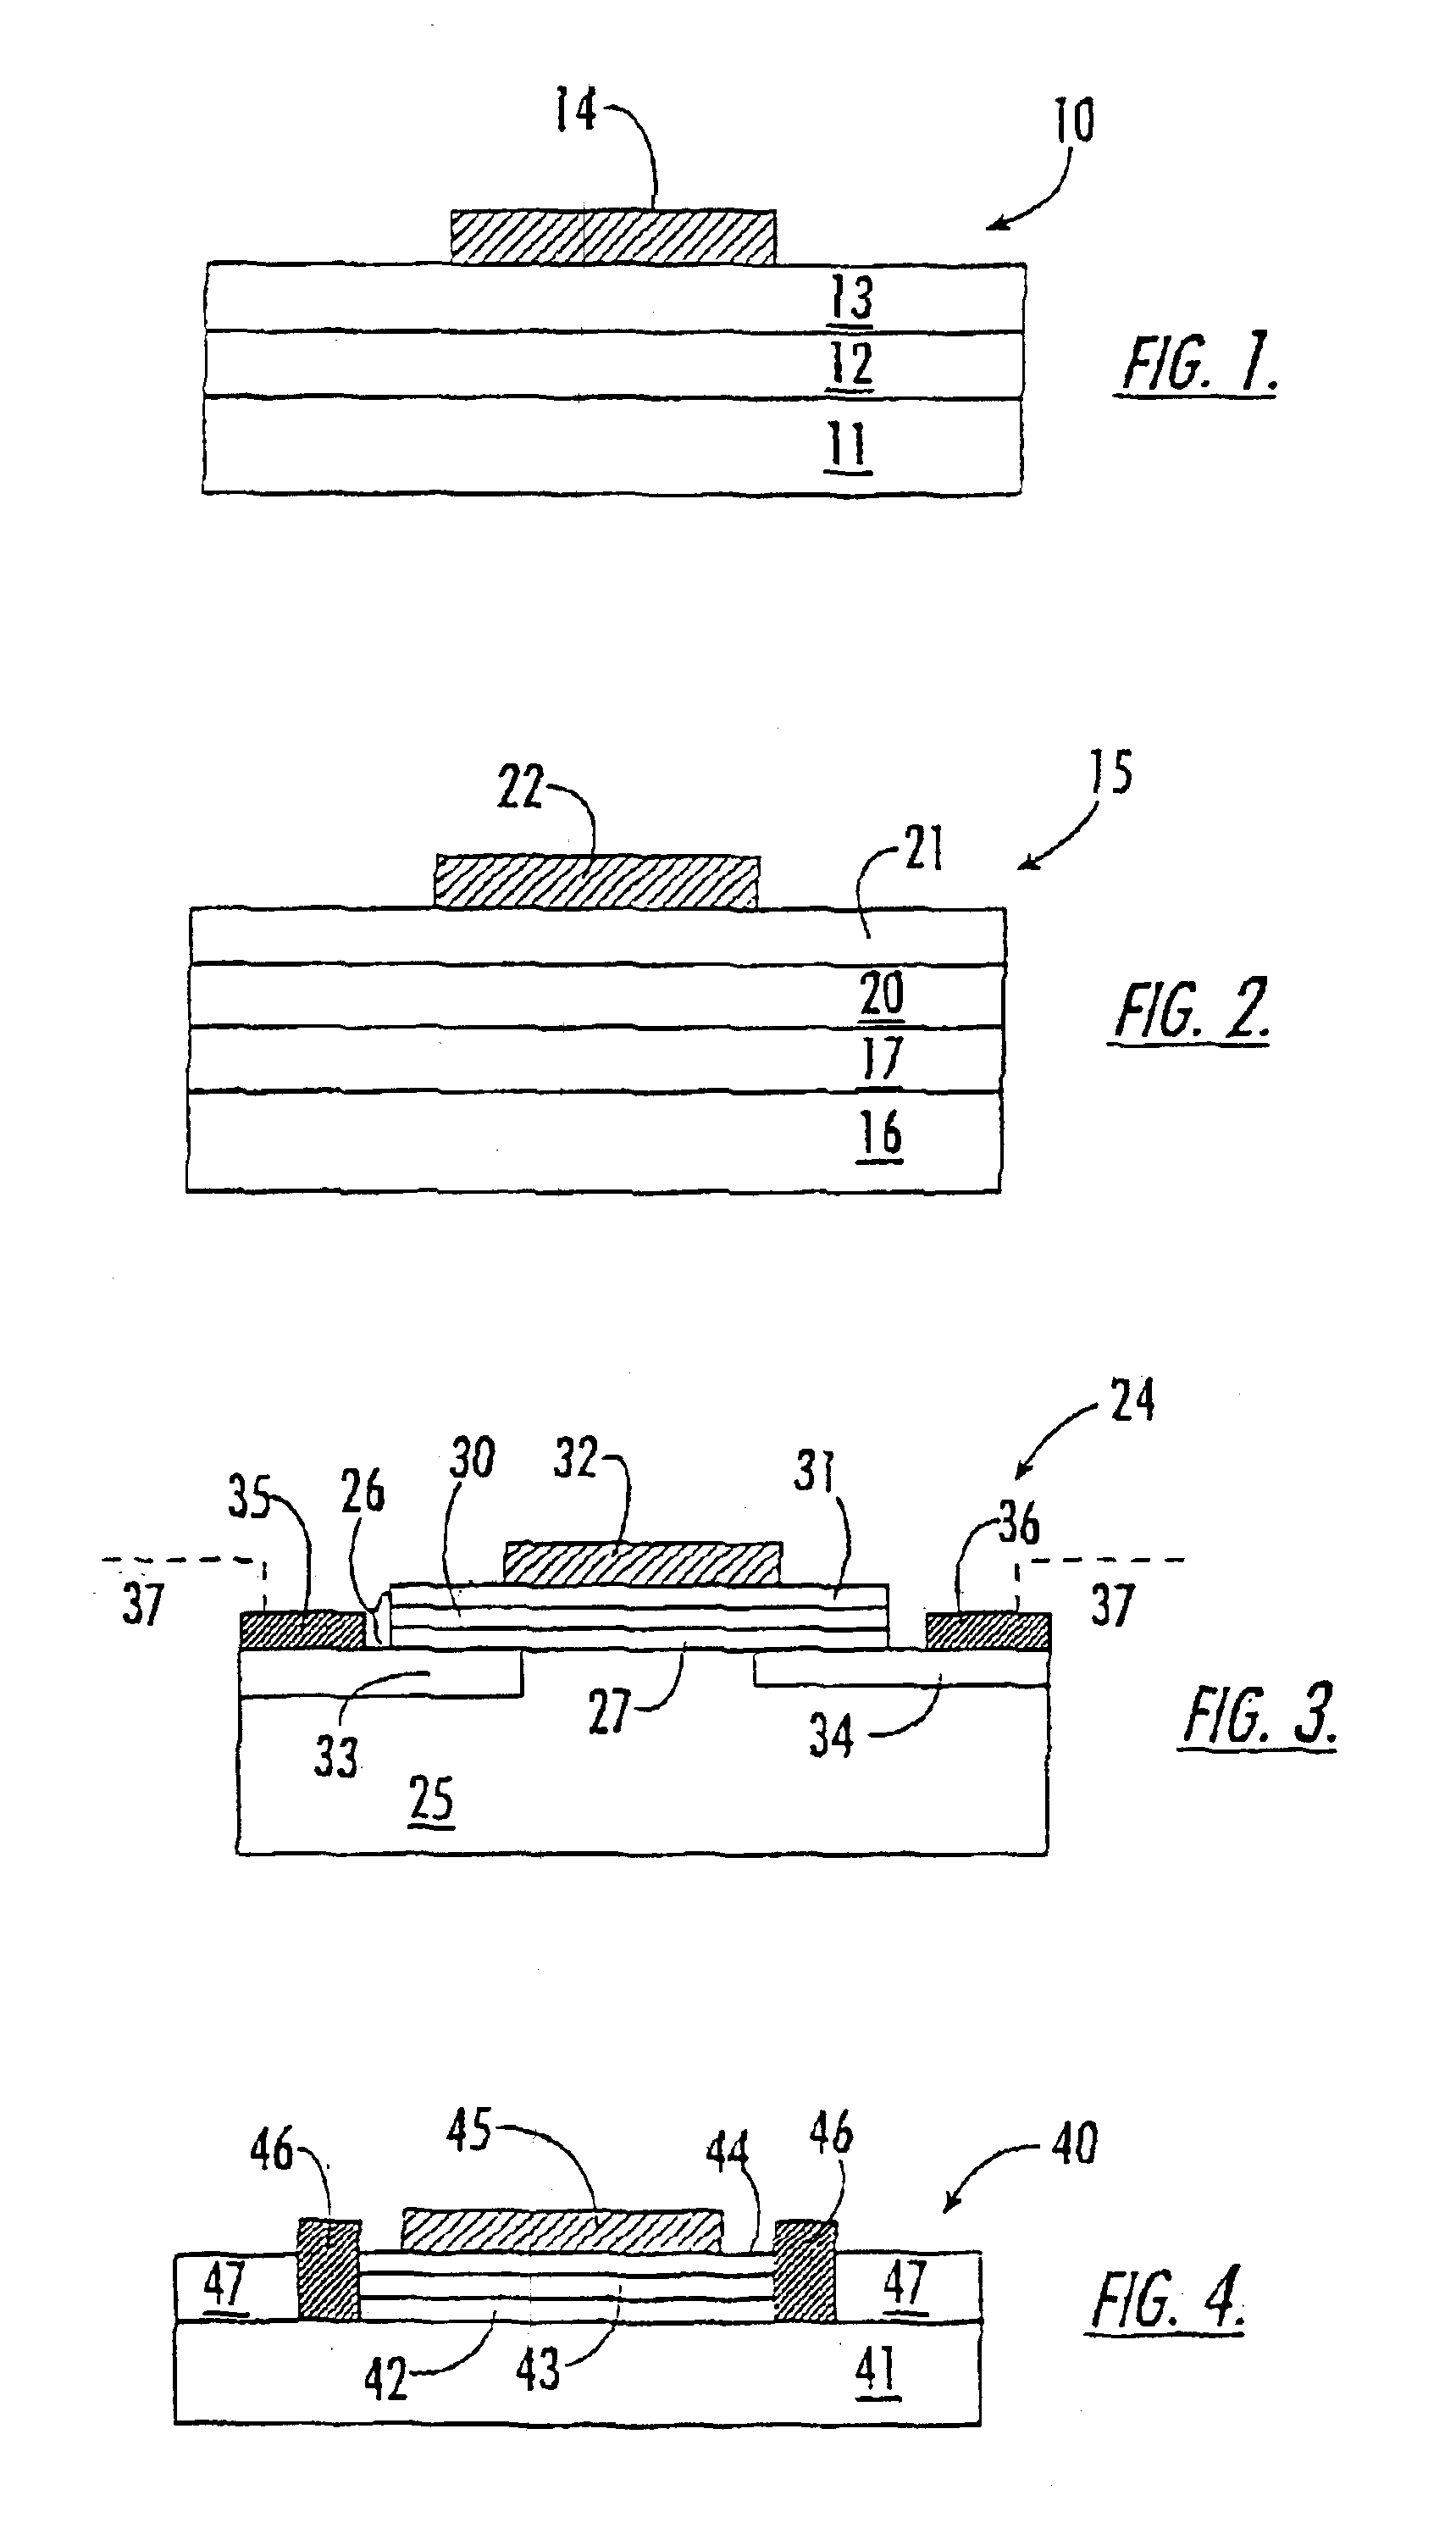 Methods of fabricating high voltage, high temperature capacitor and interconnection structures